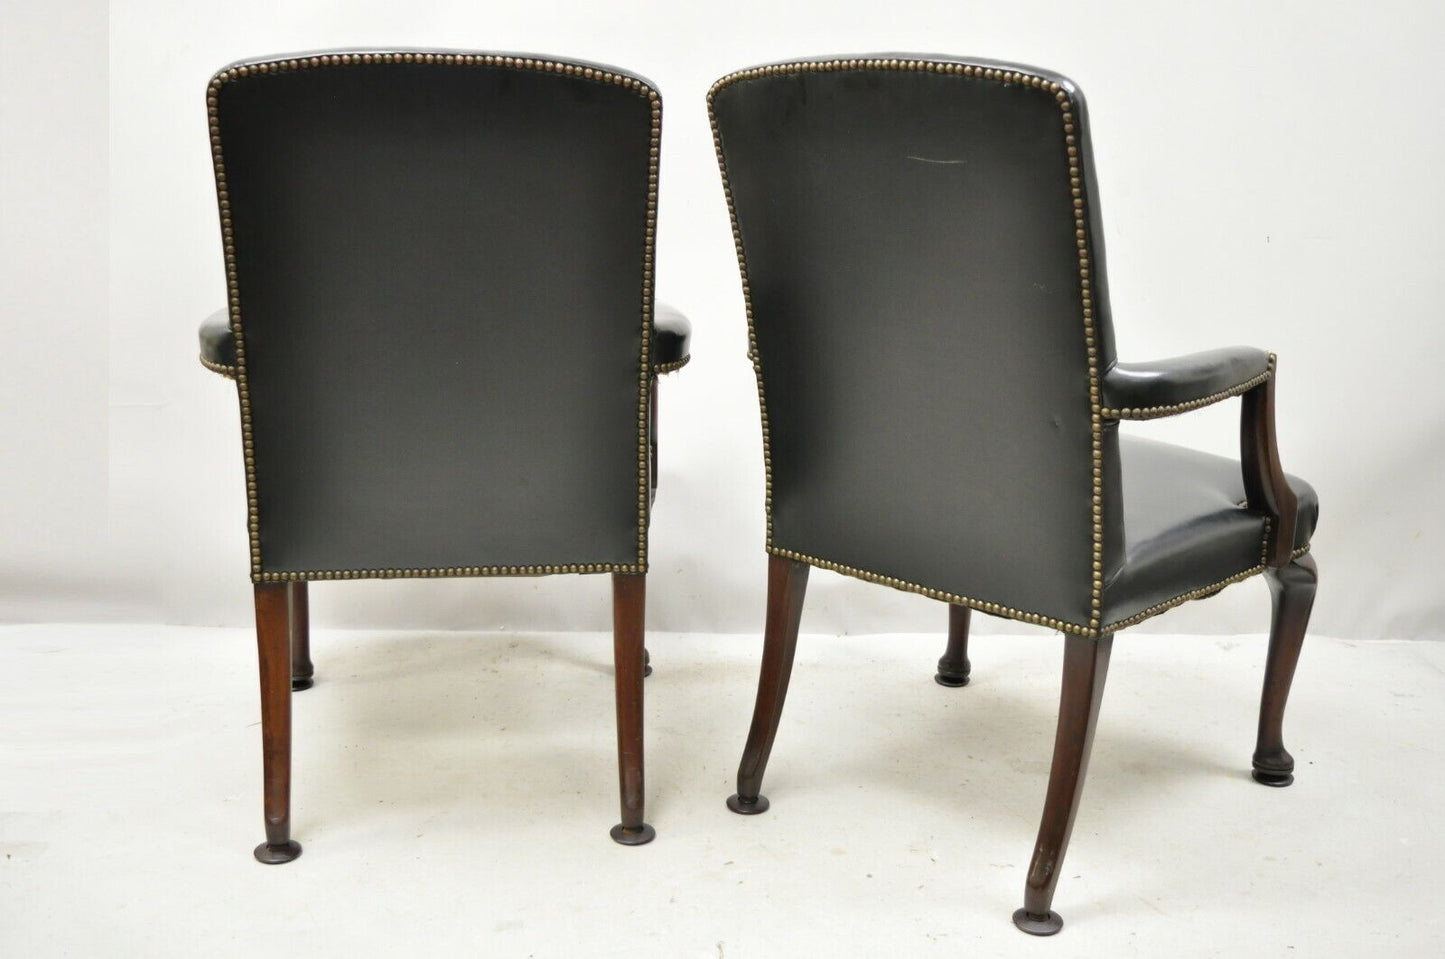 Antique English Georgian Style Dark Green Leather Library Office Chairs - a Pair